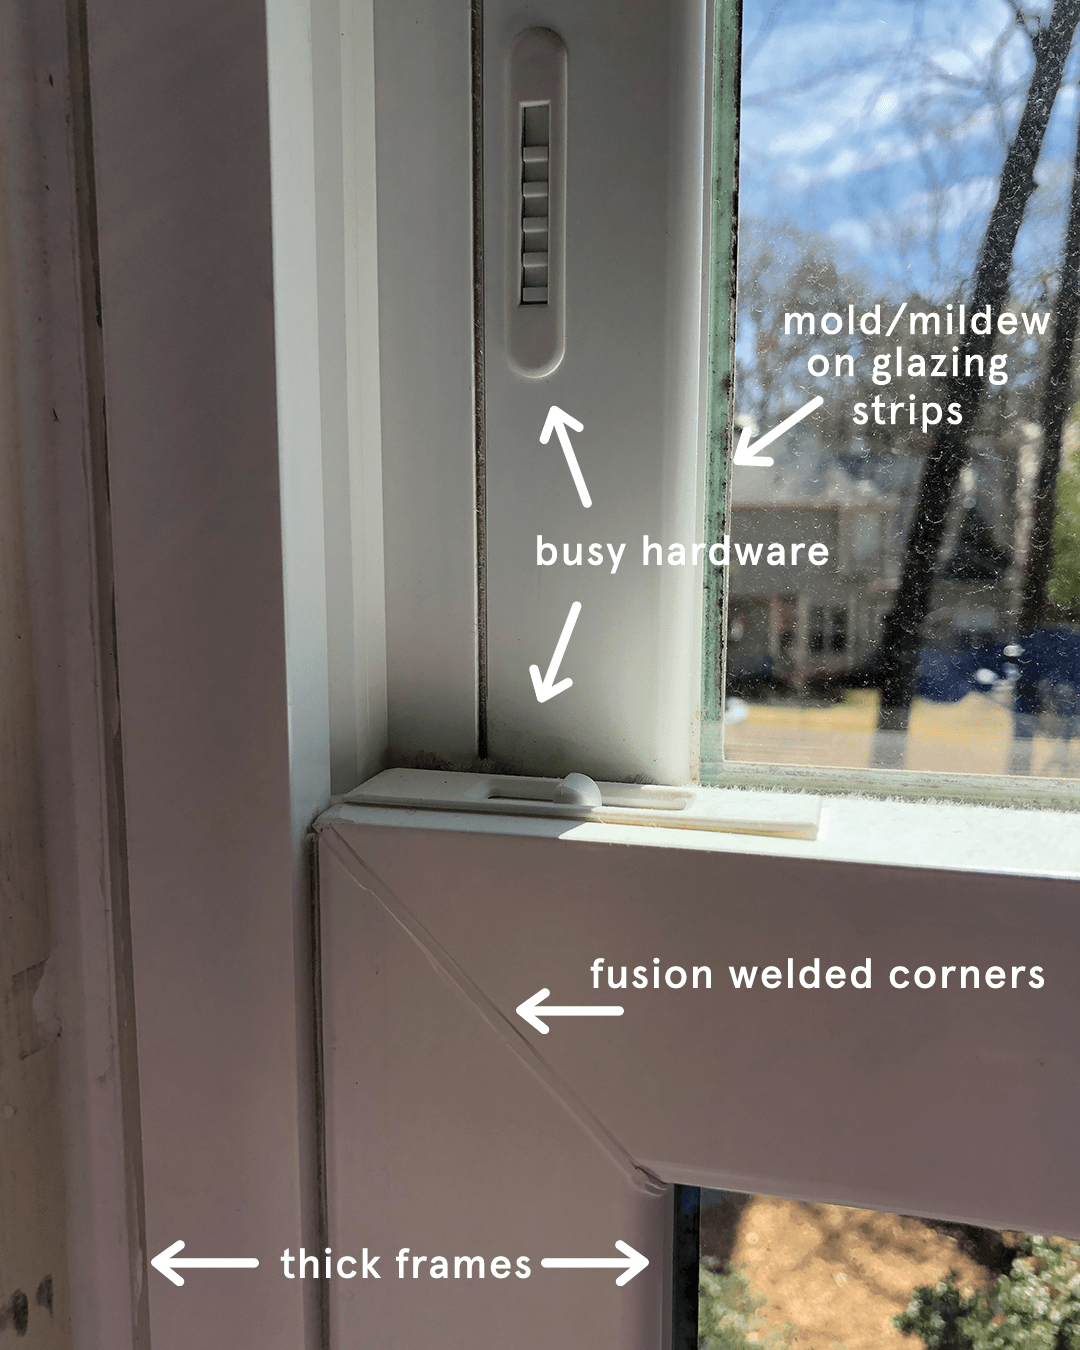 Vinyl window: Thicker, bulkier frames, unsightly fusion welded corners, busy hardware, and moldy glazing strips